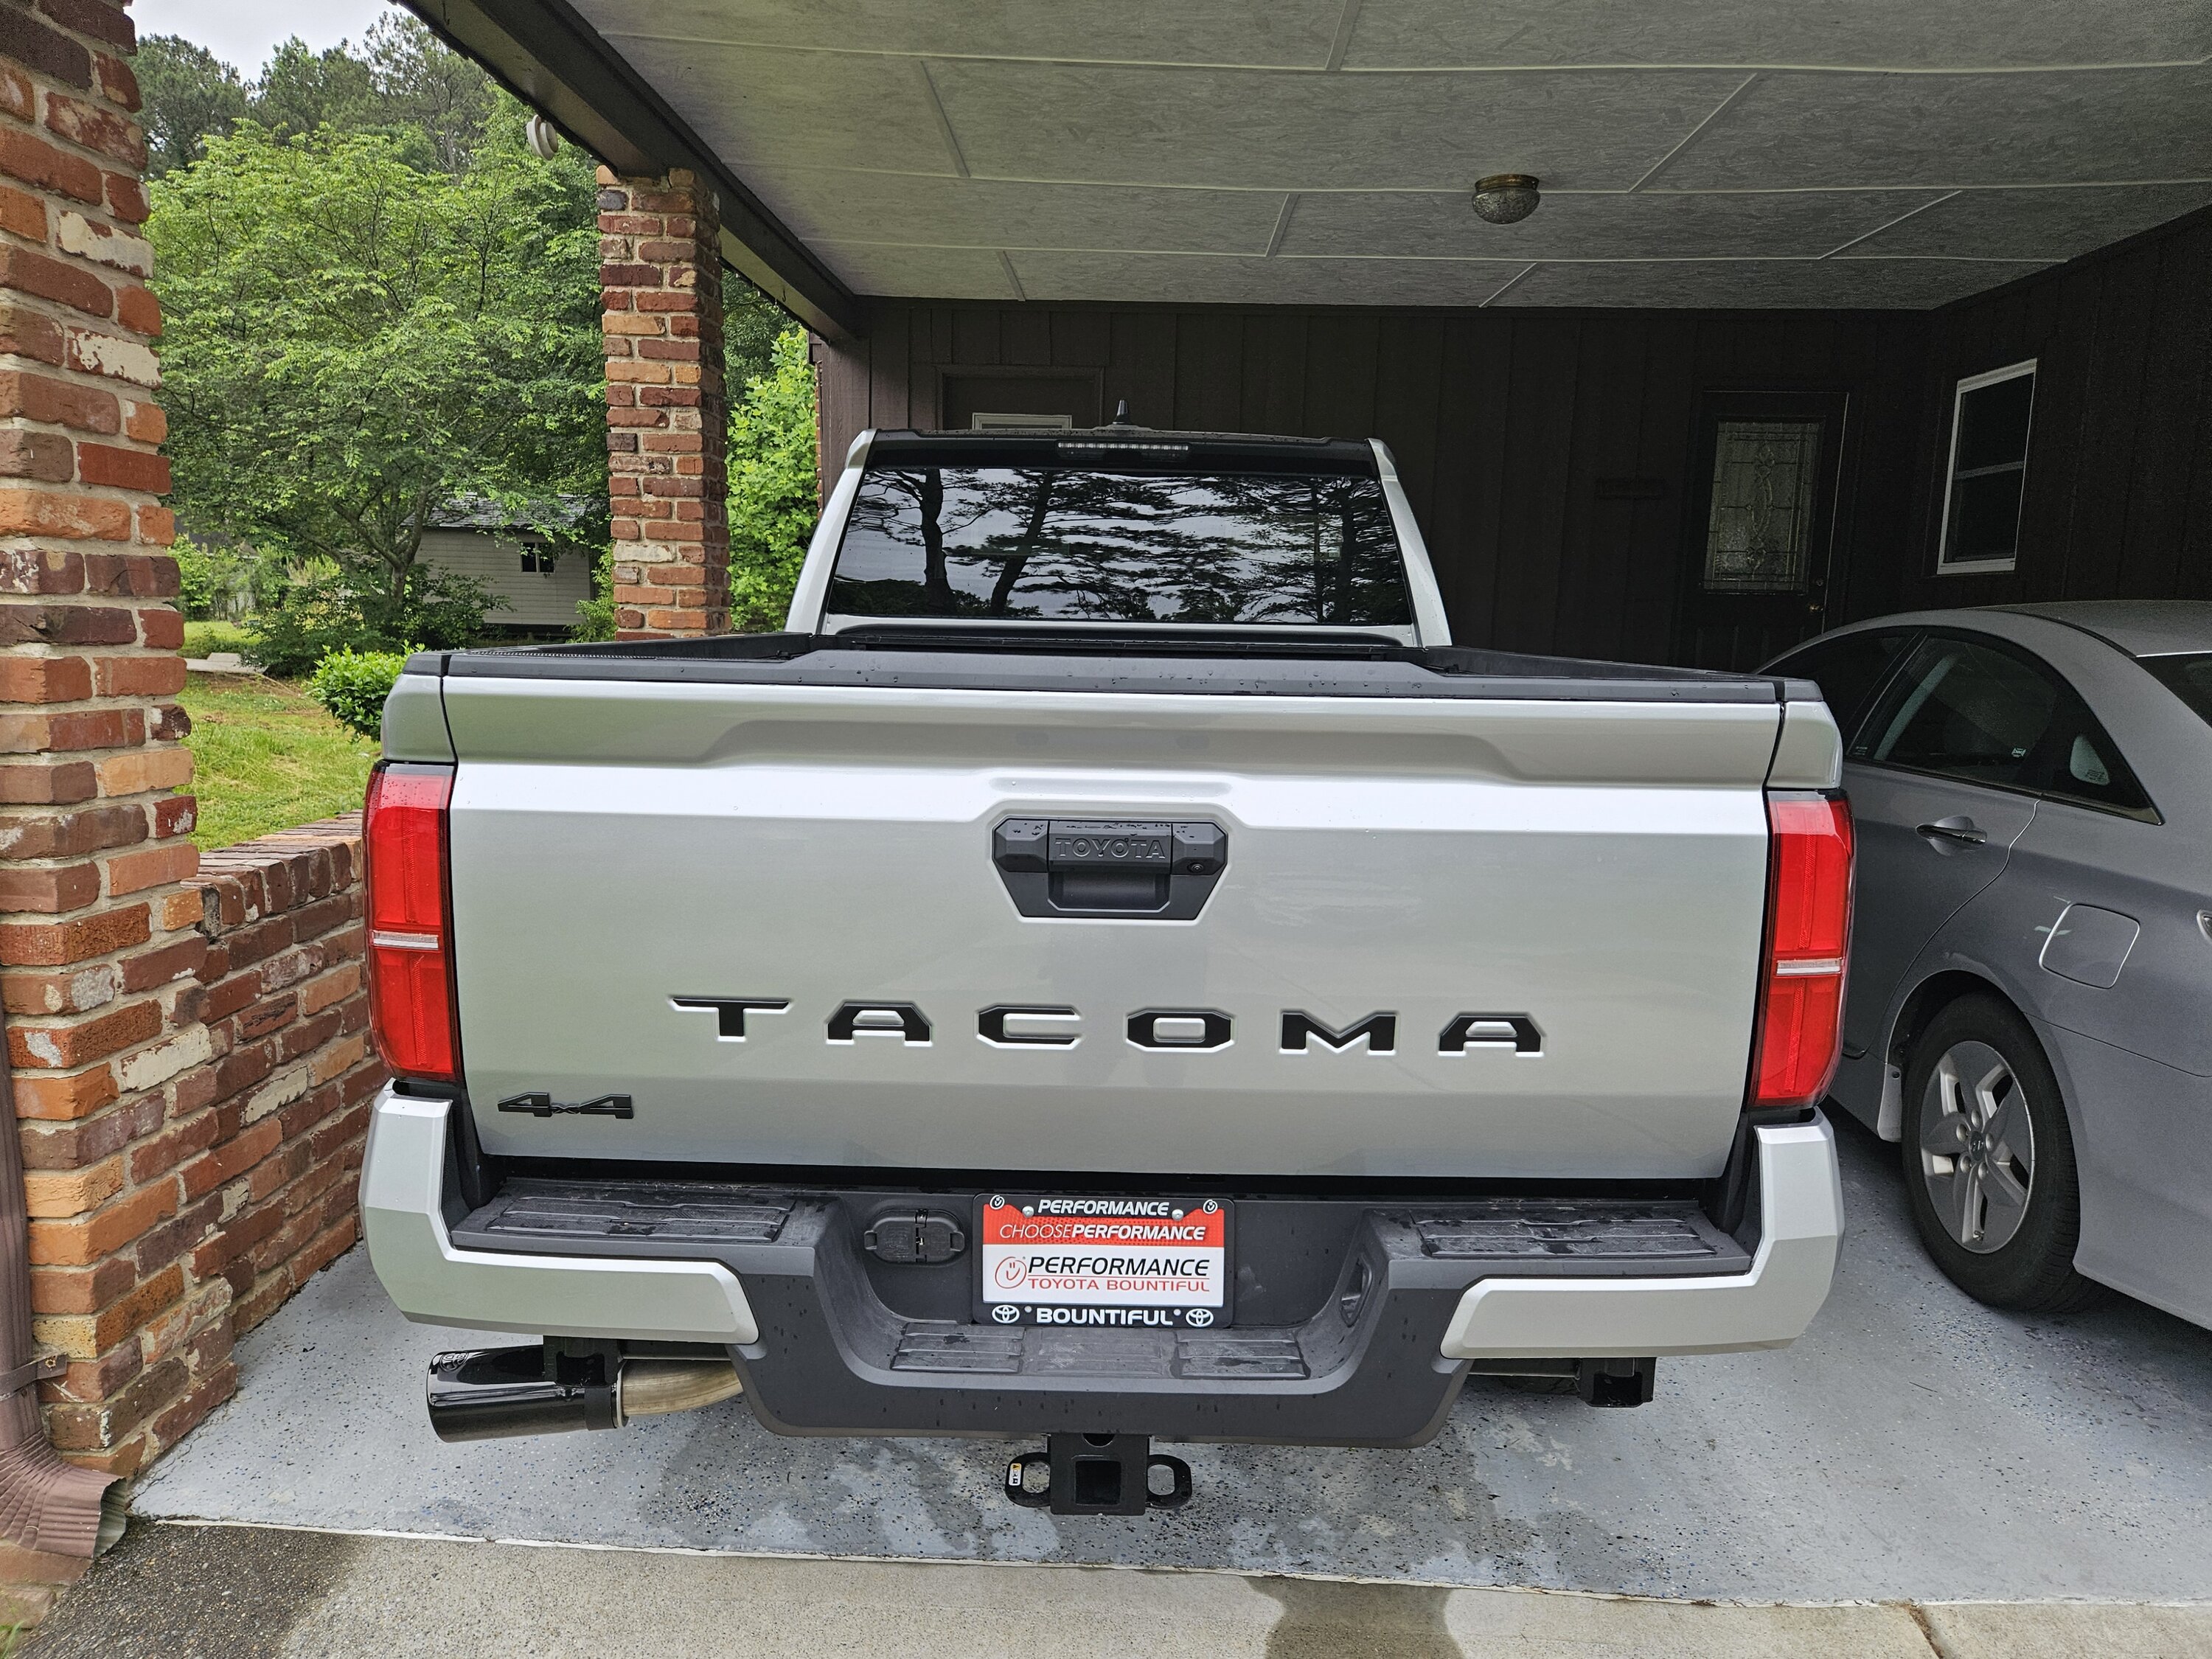 2024 Tacoma Xtracab 2024 Tacoma SR5 in Celestial Silver Metallic w/ better photos, different wheels, and a basic review 1000007626